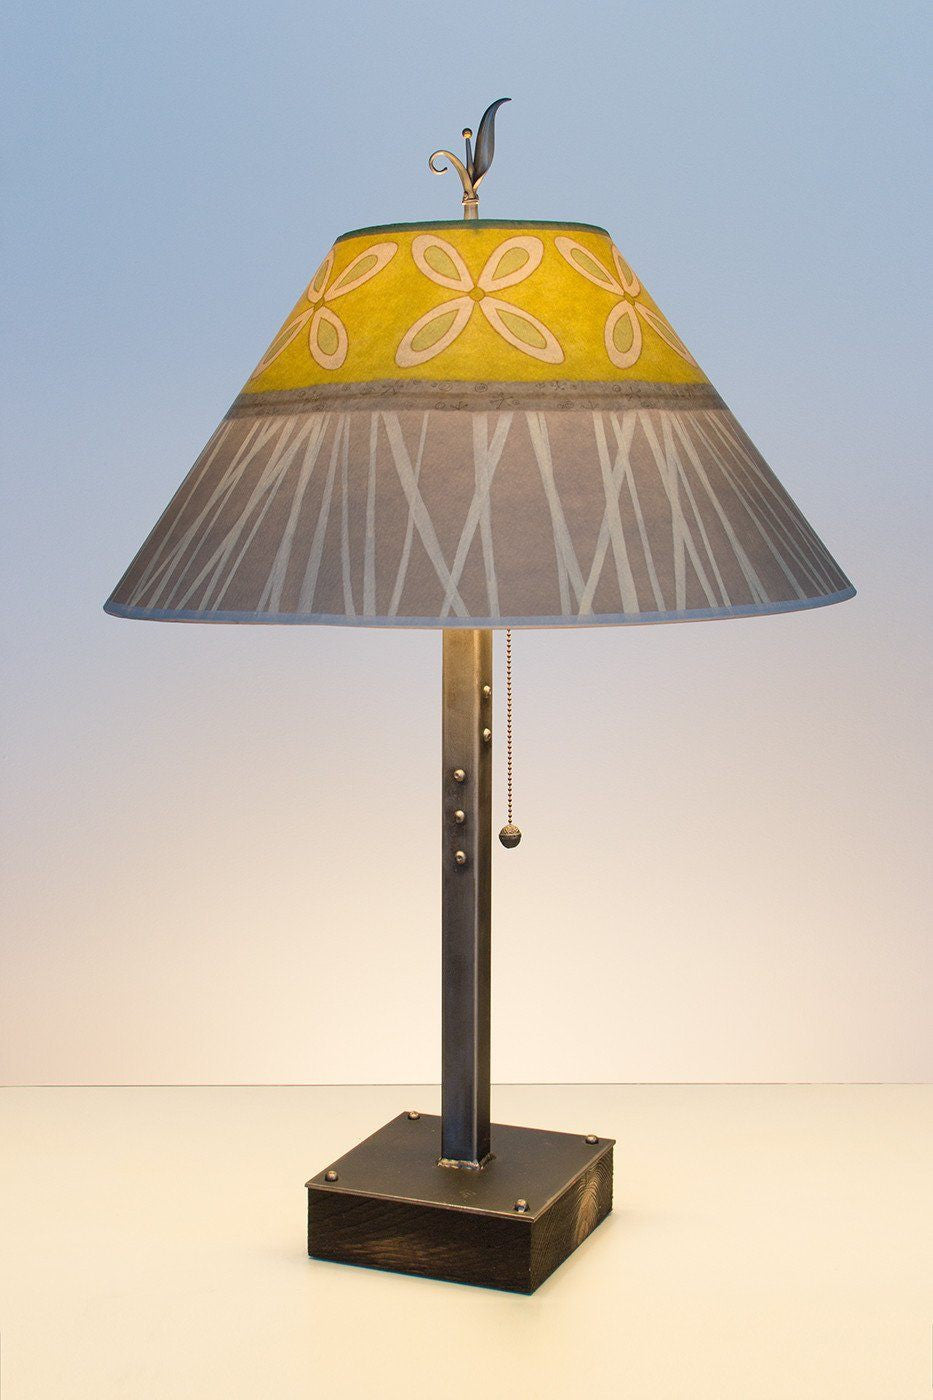 Janna Ugone & Co Table Lamps Steel Table Lamp on Wood with Large Conical Shade in Kiwi